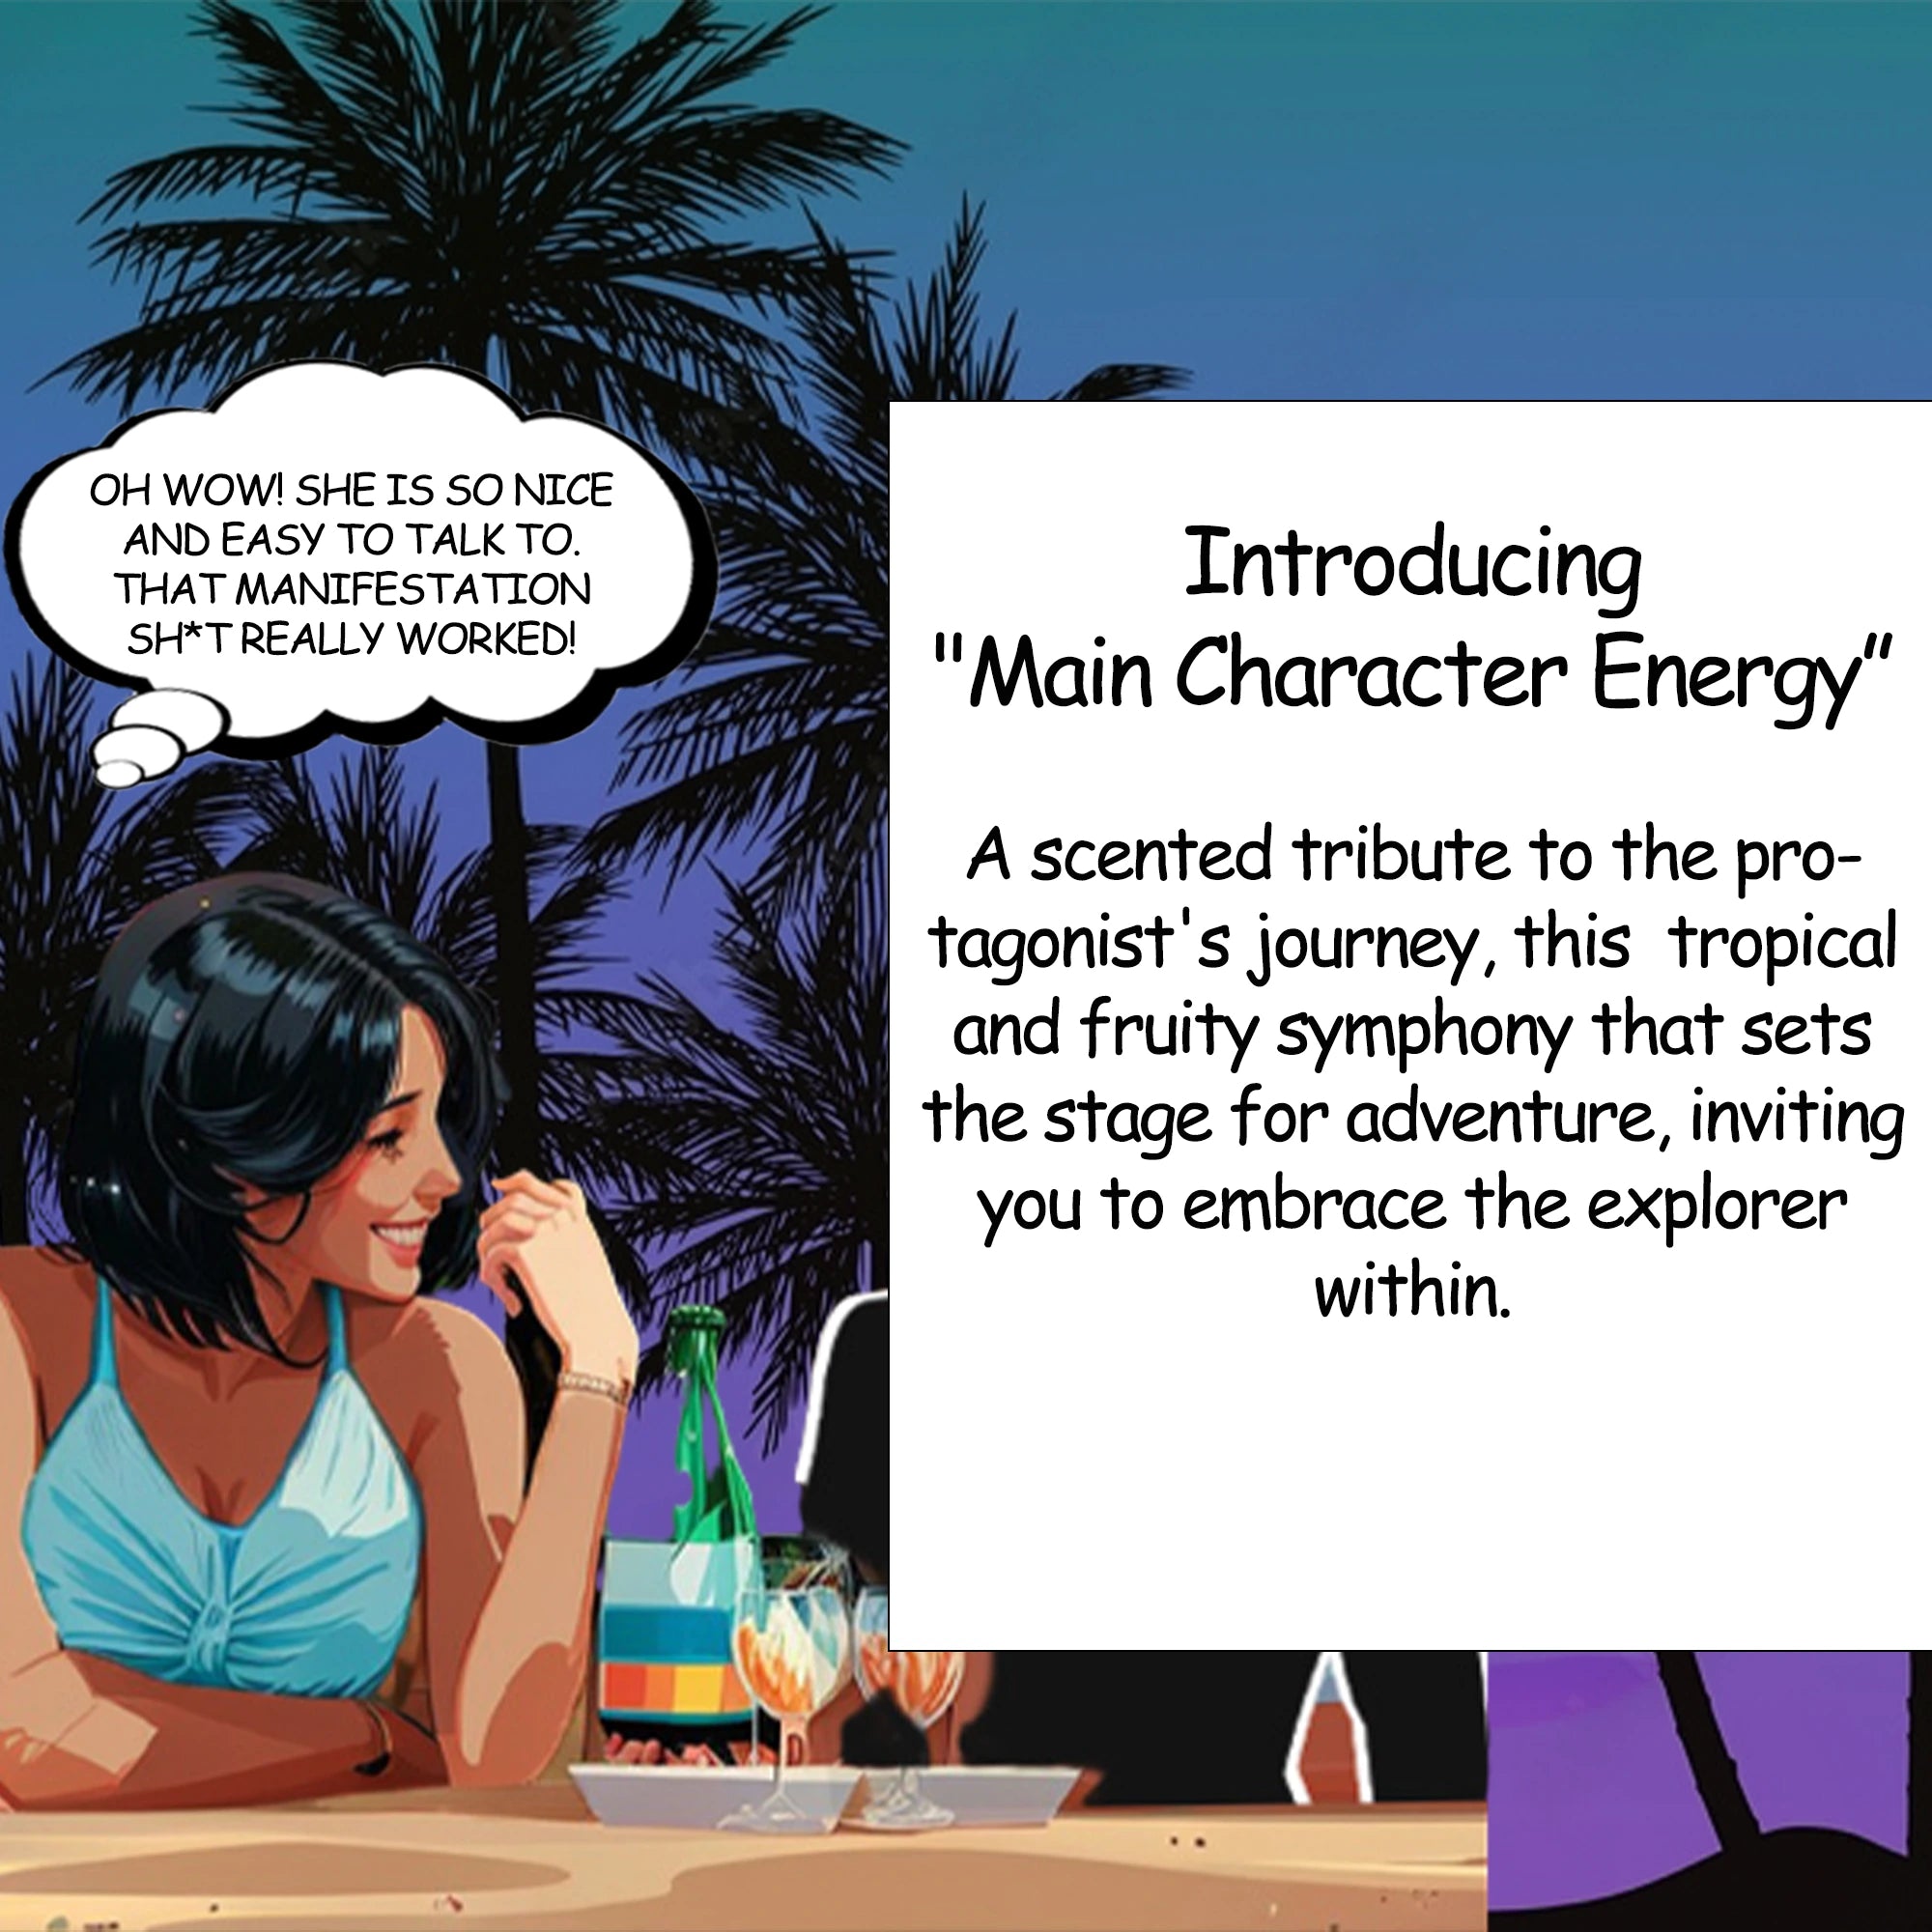 Anveya Mist in the city : EP05 - Main Character Energy